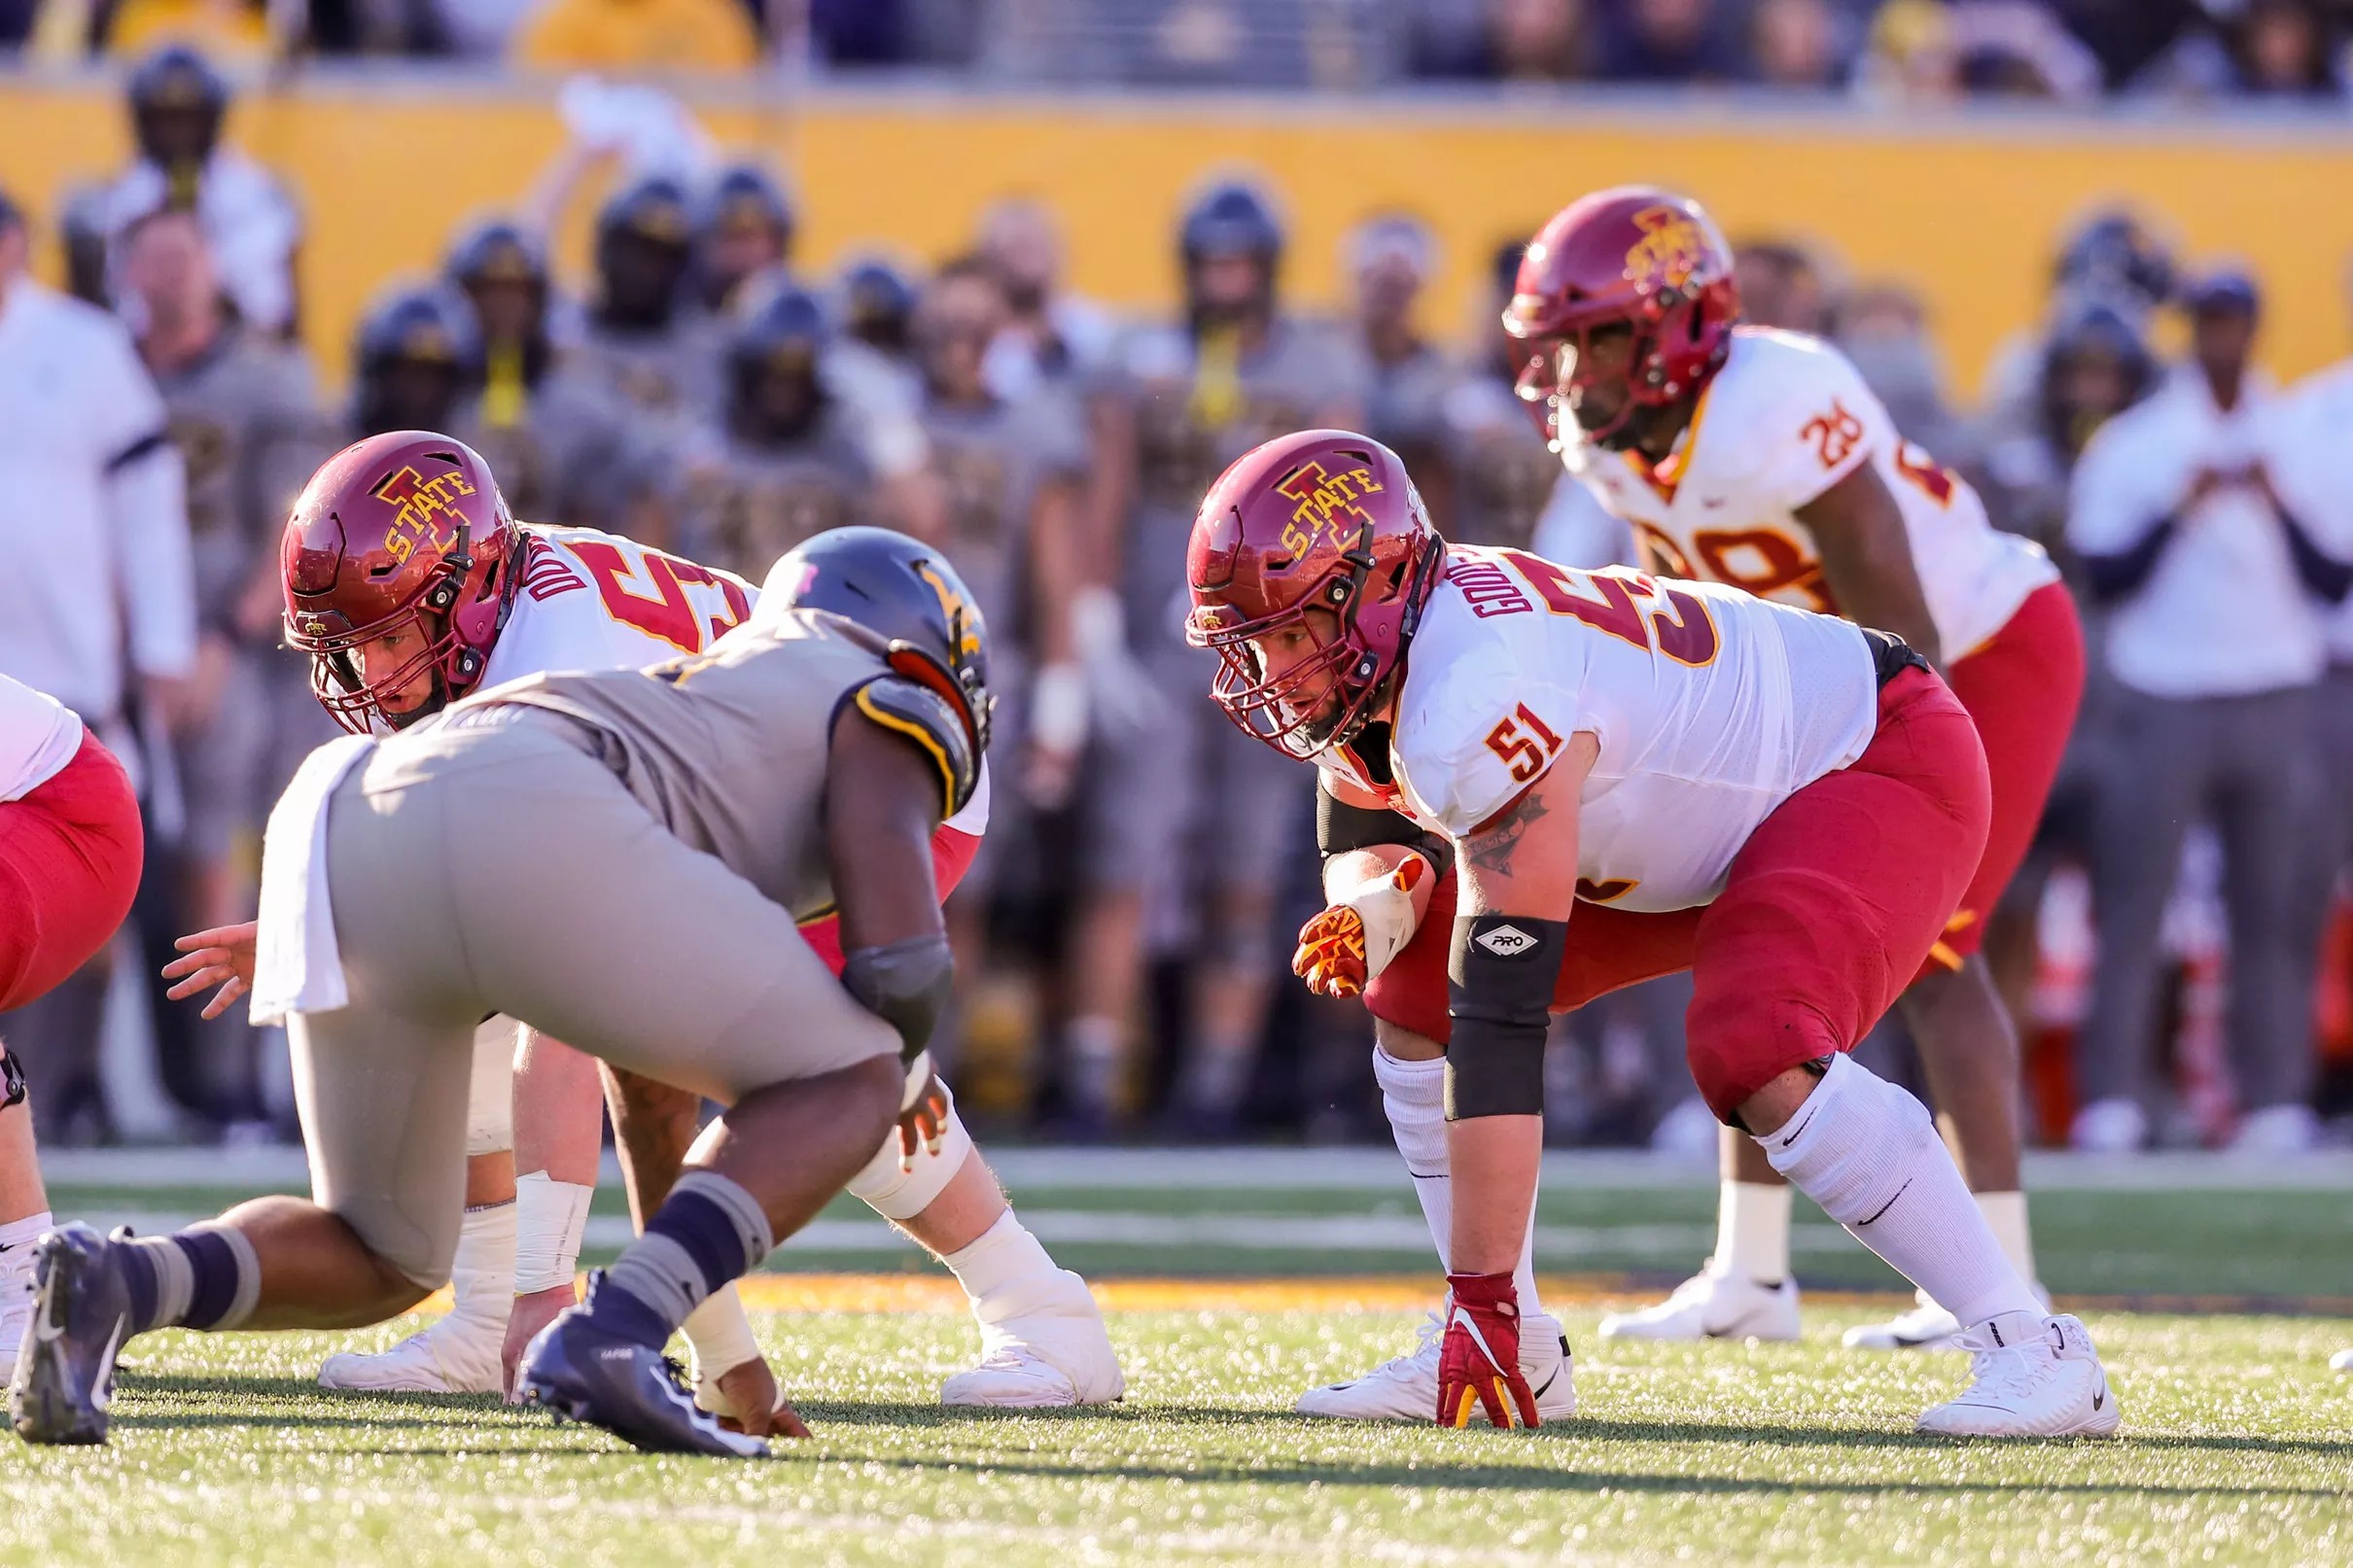 West Virginia at Iowa State Football Game on Dec. 5 Scheduled for 330